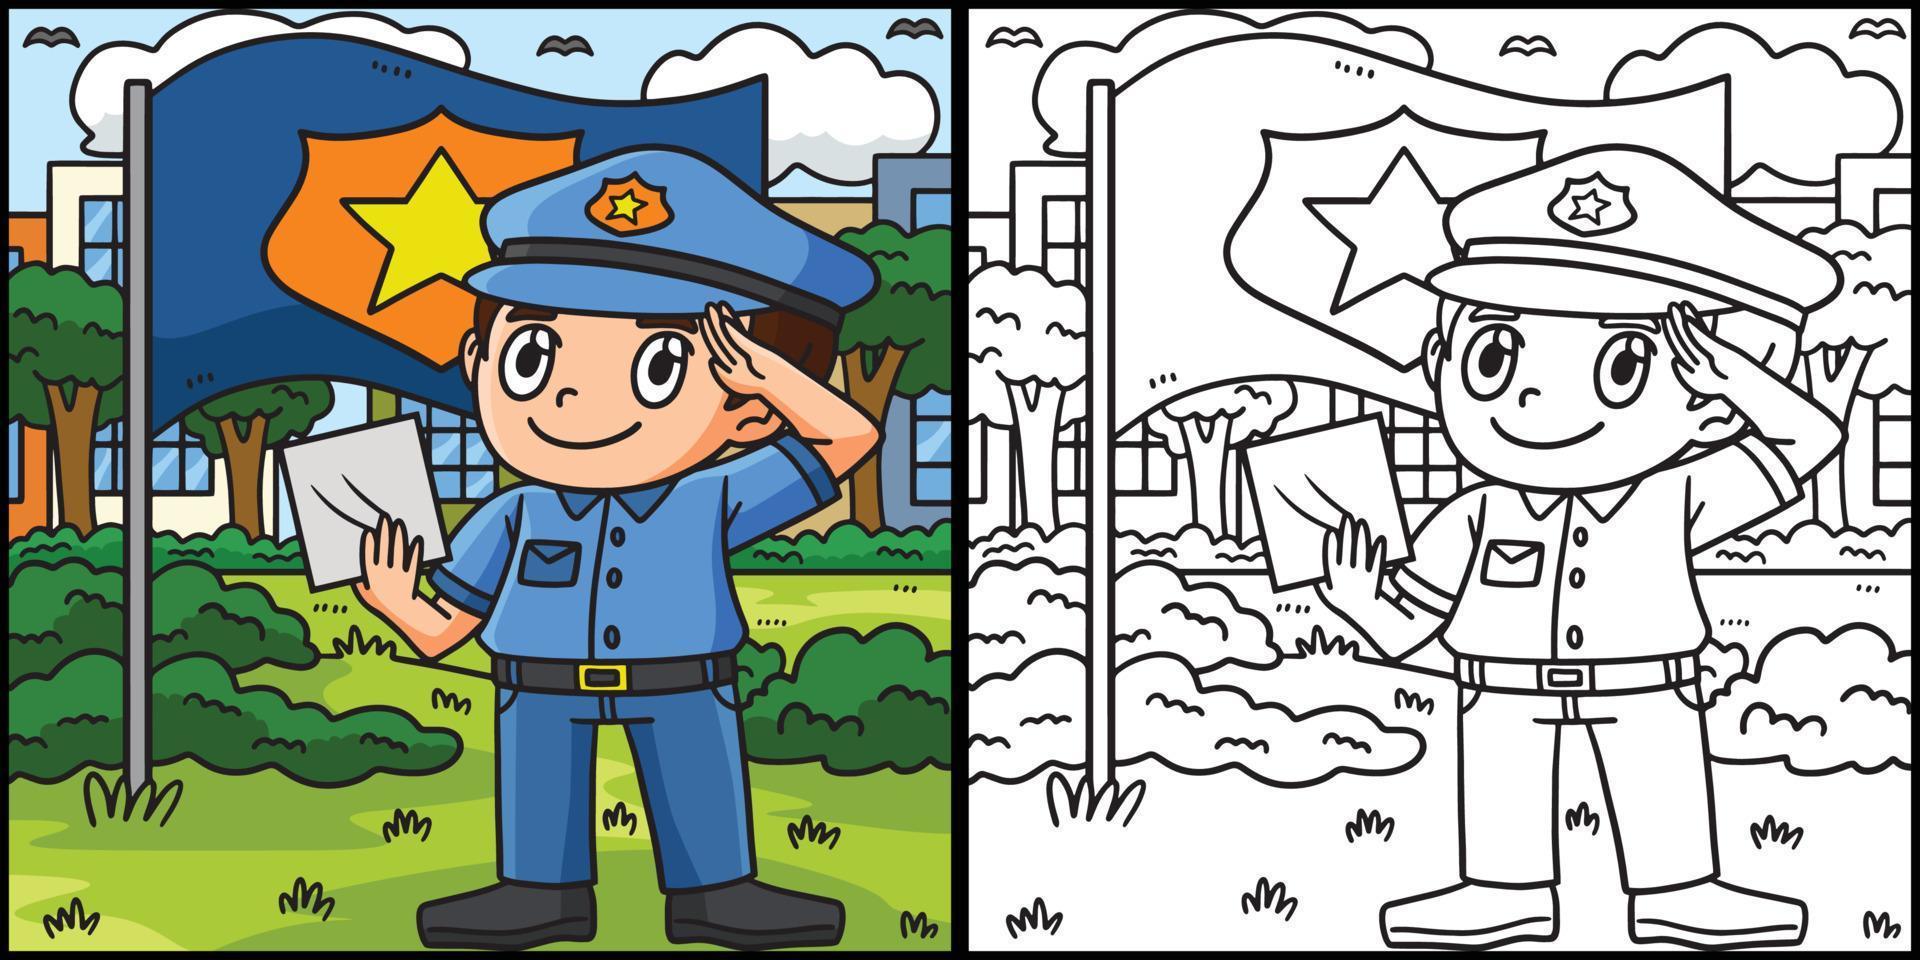 Saluting Police Officer Coloring Page Illustration vector